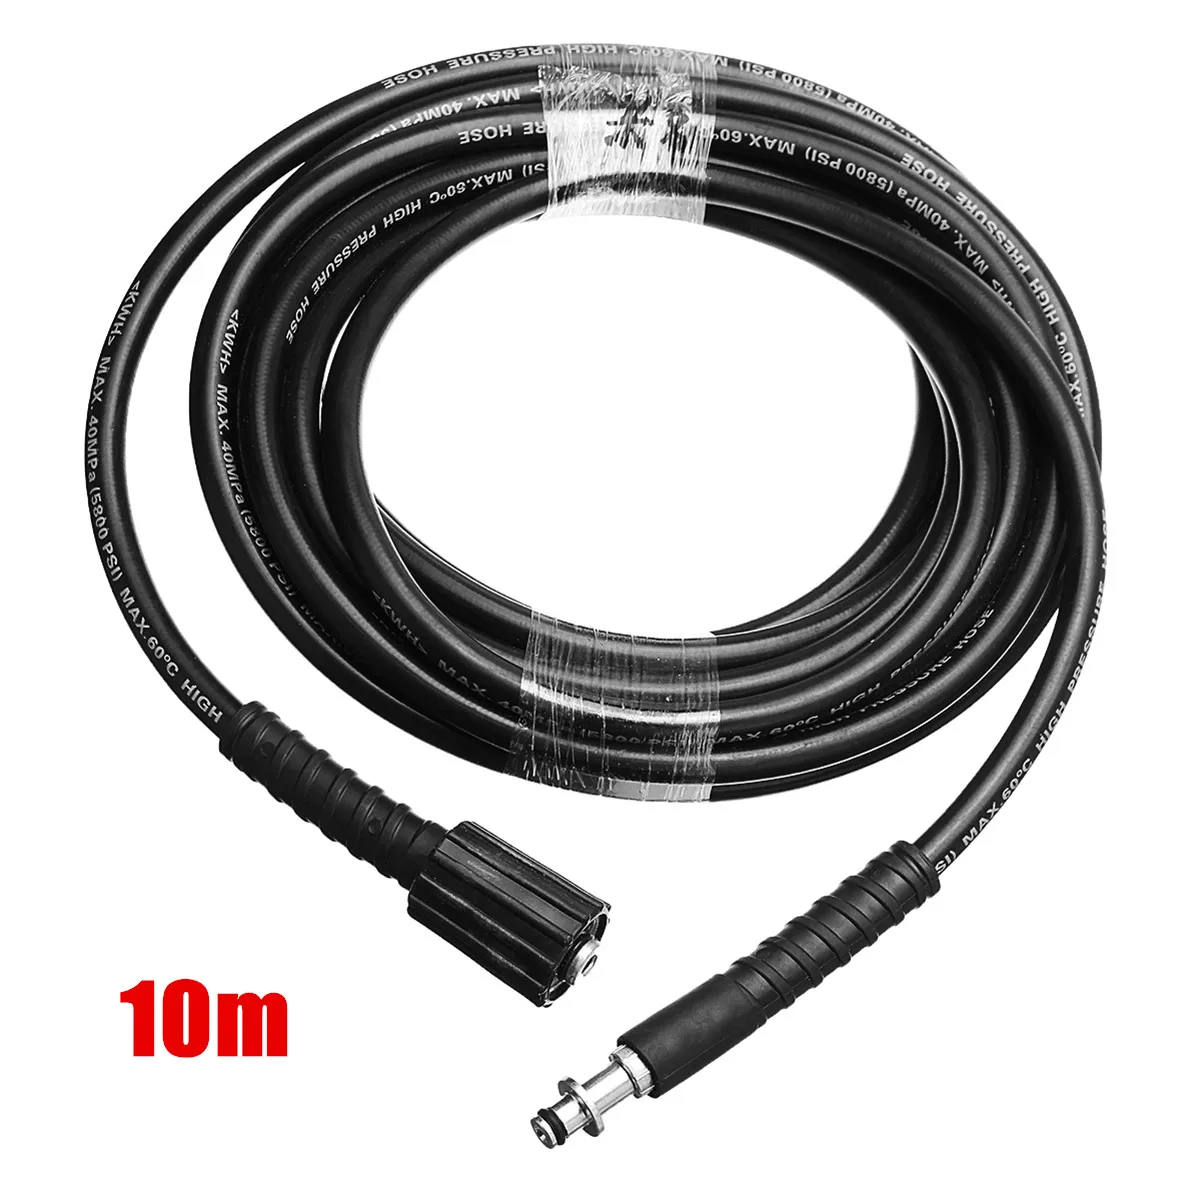 

10m High Pressure Washer Hose Pipe Cord Car Washer Water Cleaning Extension Gun Quick Connect for Karcher K5 K2 K3 K4 K7